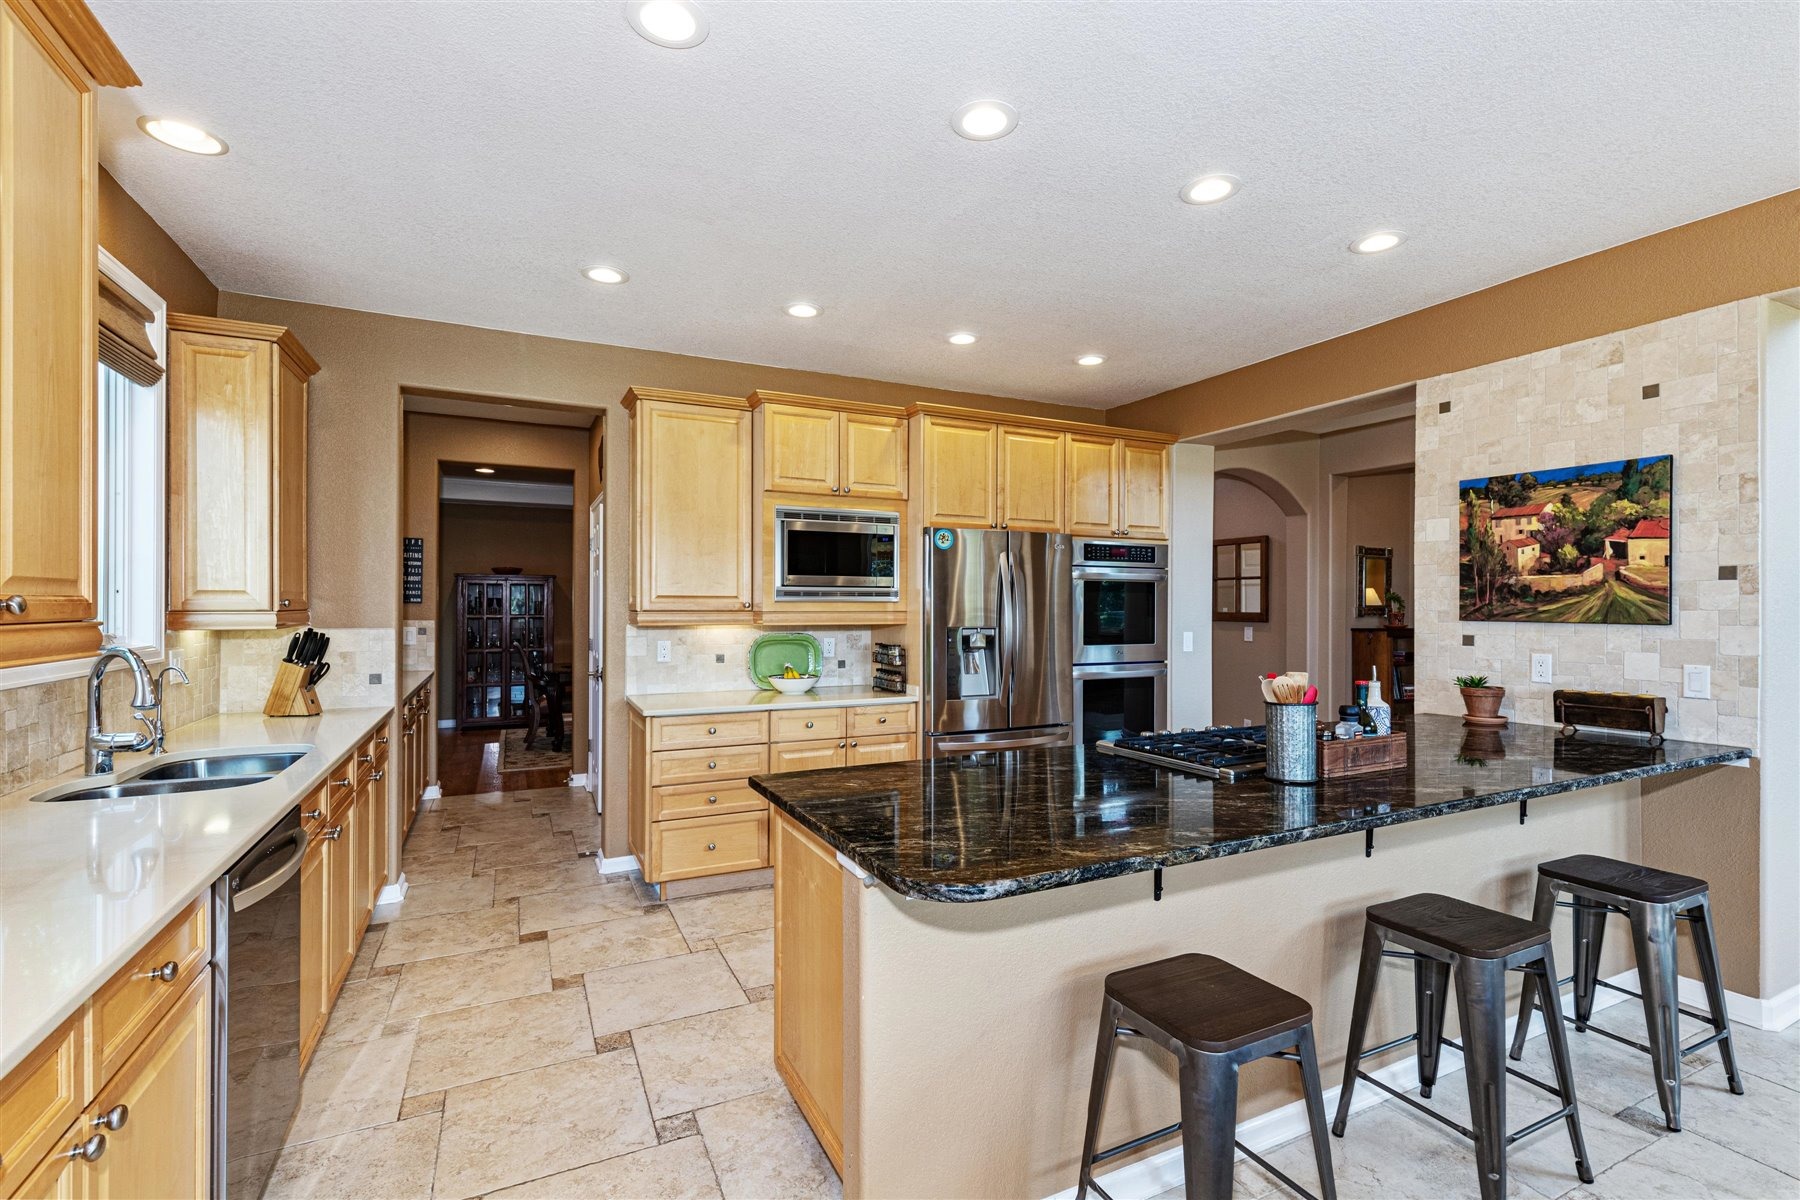 Large Tile Floors and Expansive Countertops